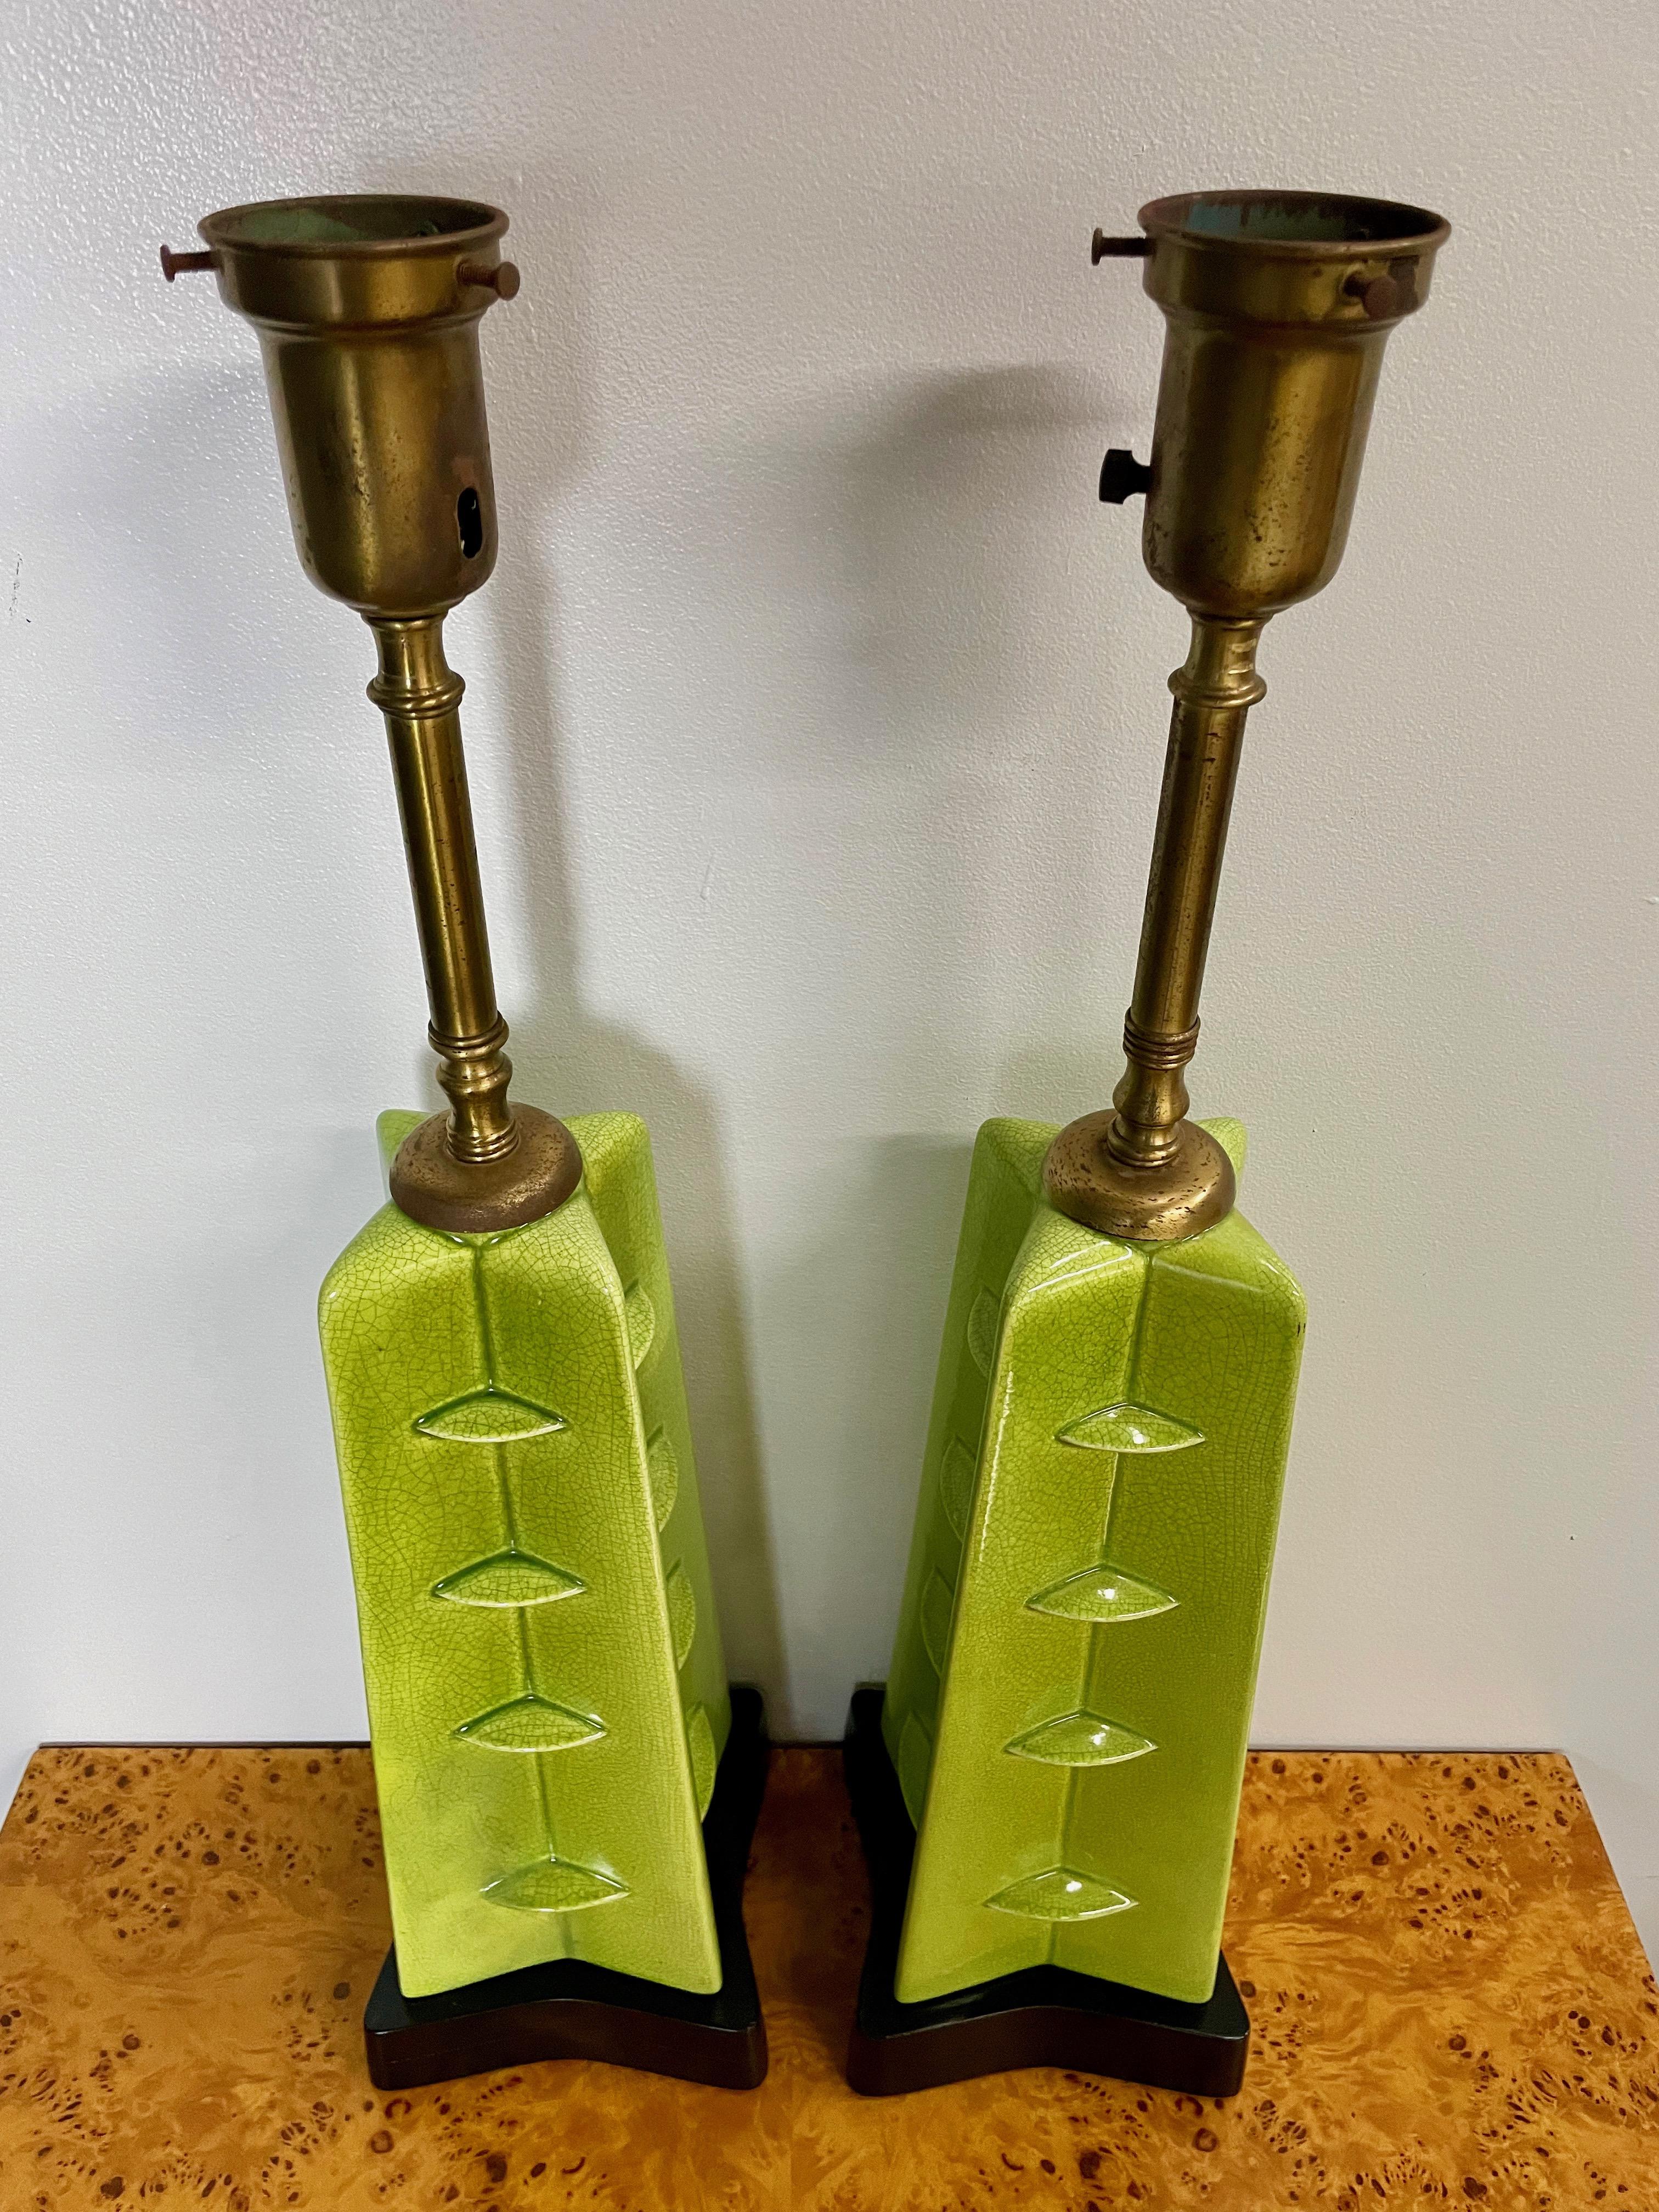 North American Glazed Chartreuse Ceramic Mid Century Table Lamps Frank Lloyd Wright Style